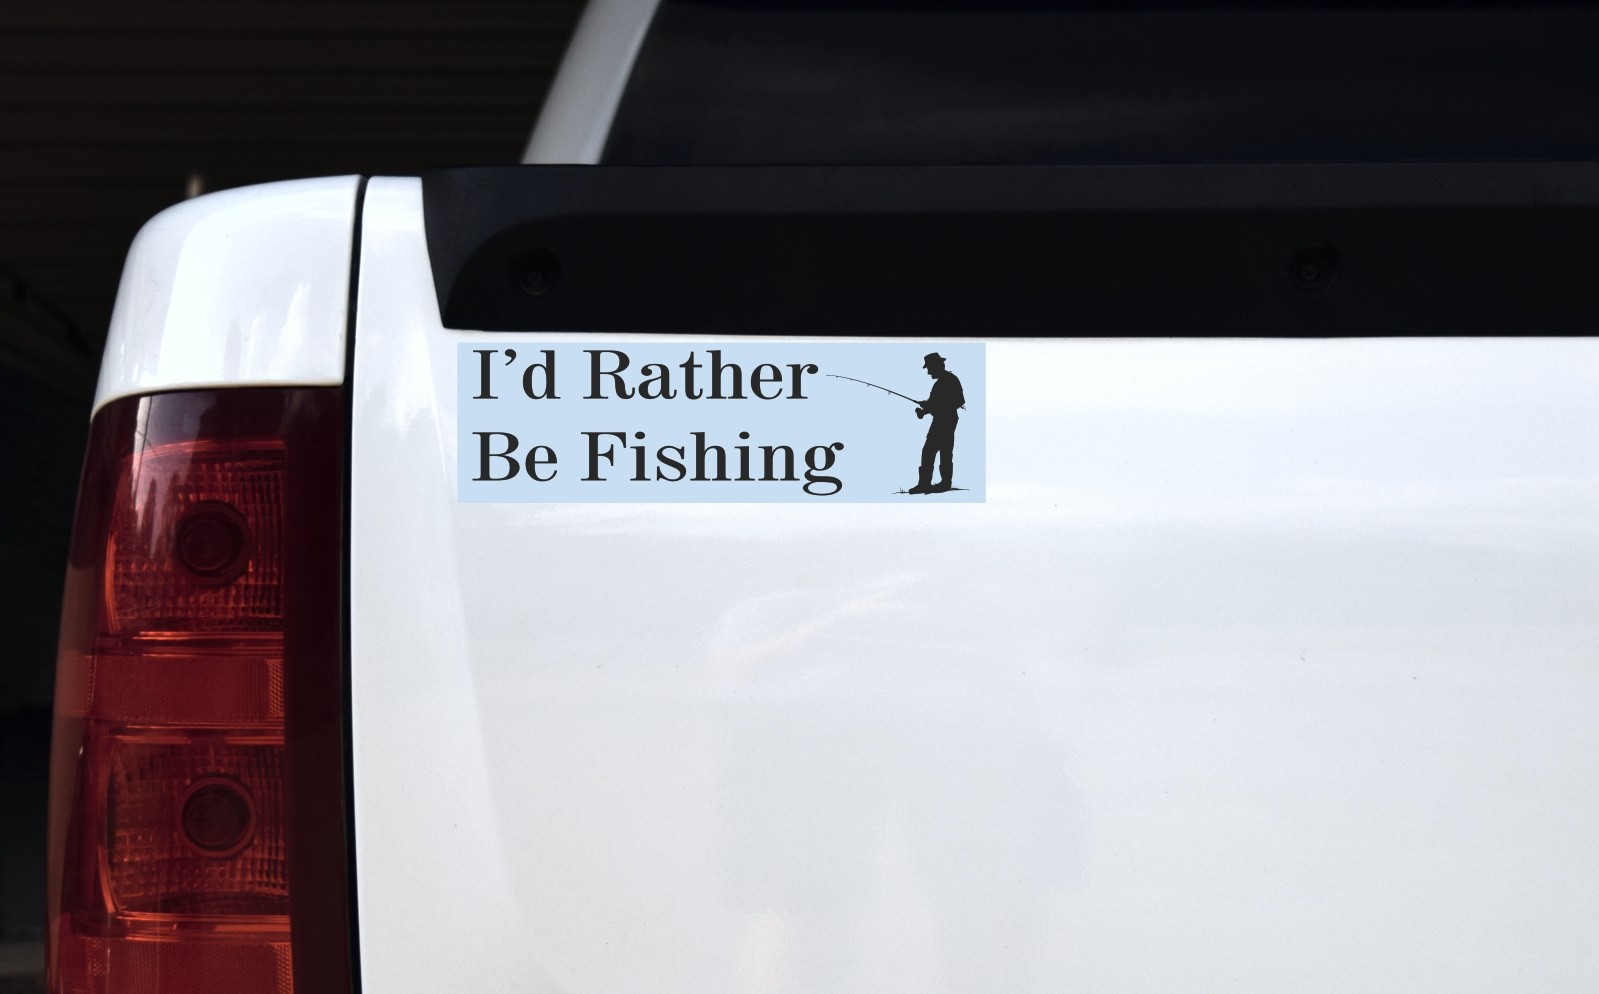 10in x 3in Fishing Makes Life Better Fishing Bumper Sticker Vinyl Stickers